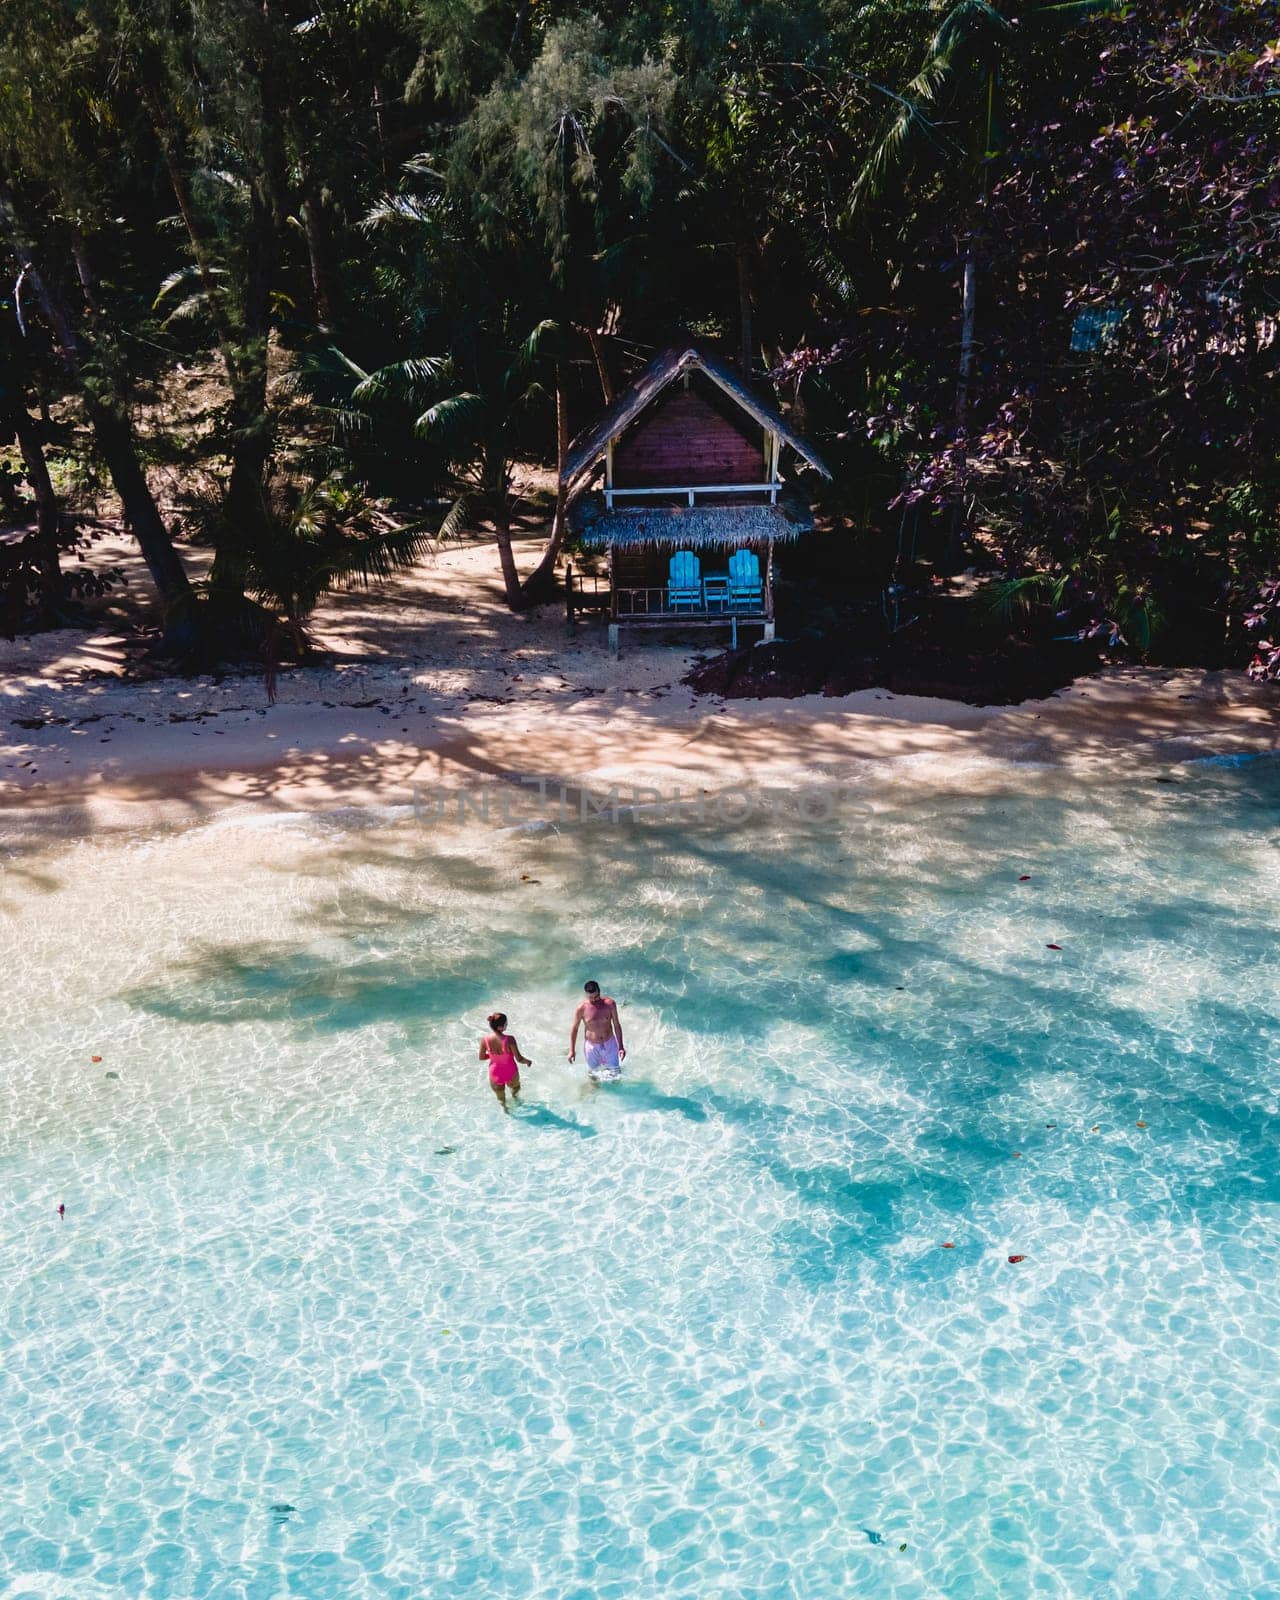 Koh Wai Island Thailand is a tinny tropical Island near Koh Chang. wooden bamboo hut bungalow on the beach. a young couple of men and women swimming in the blue ocean on a tropical Island in Thailand